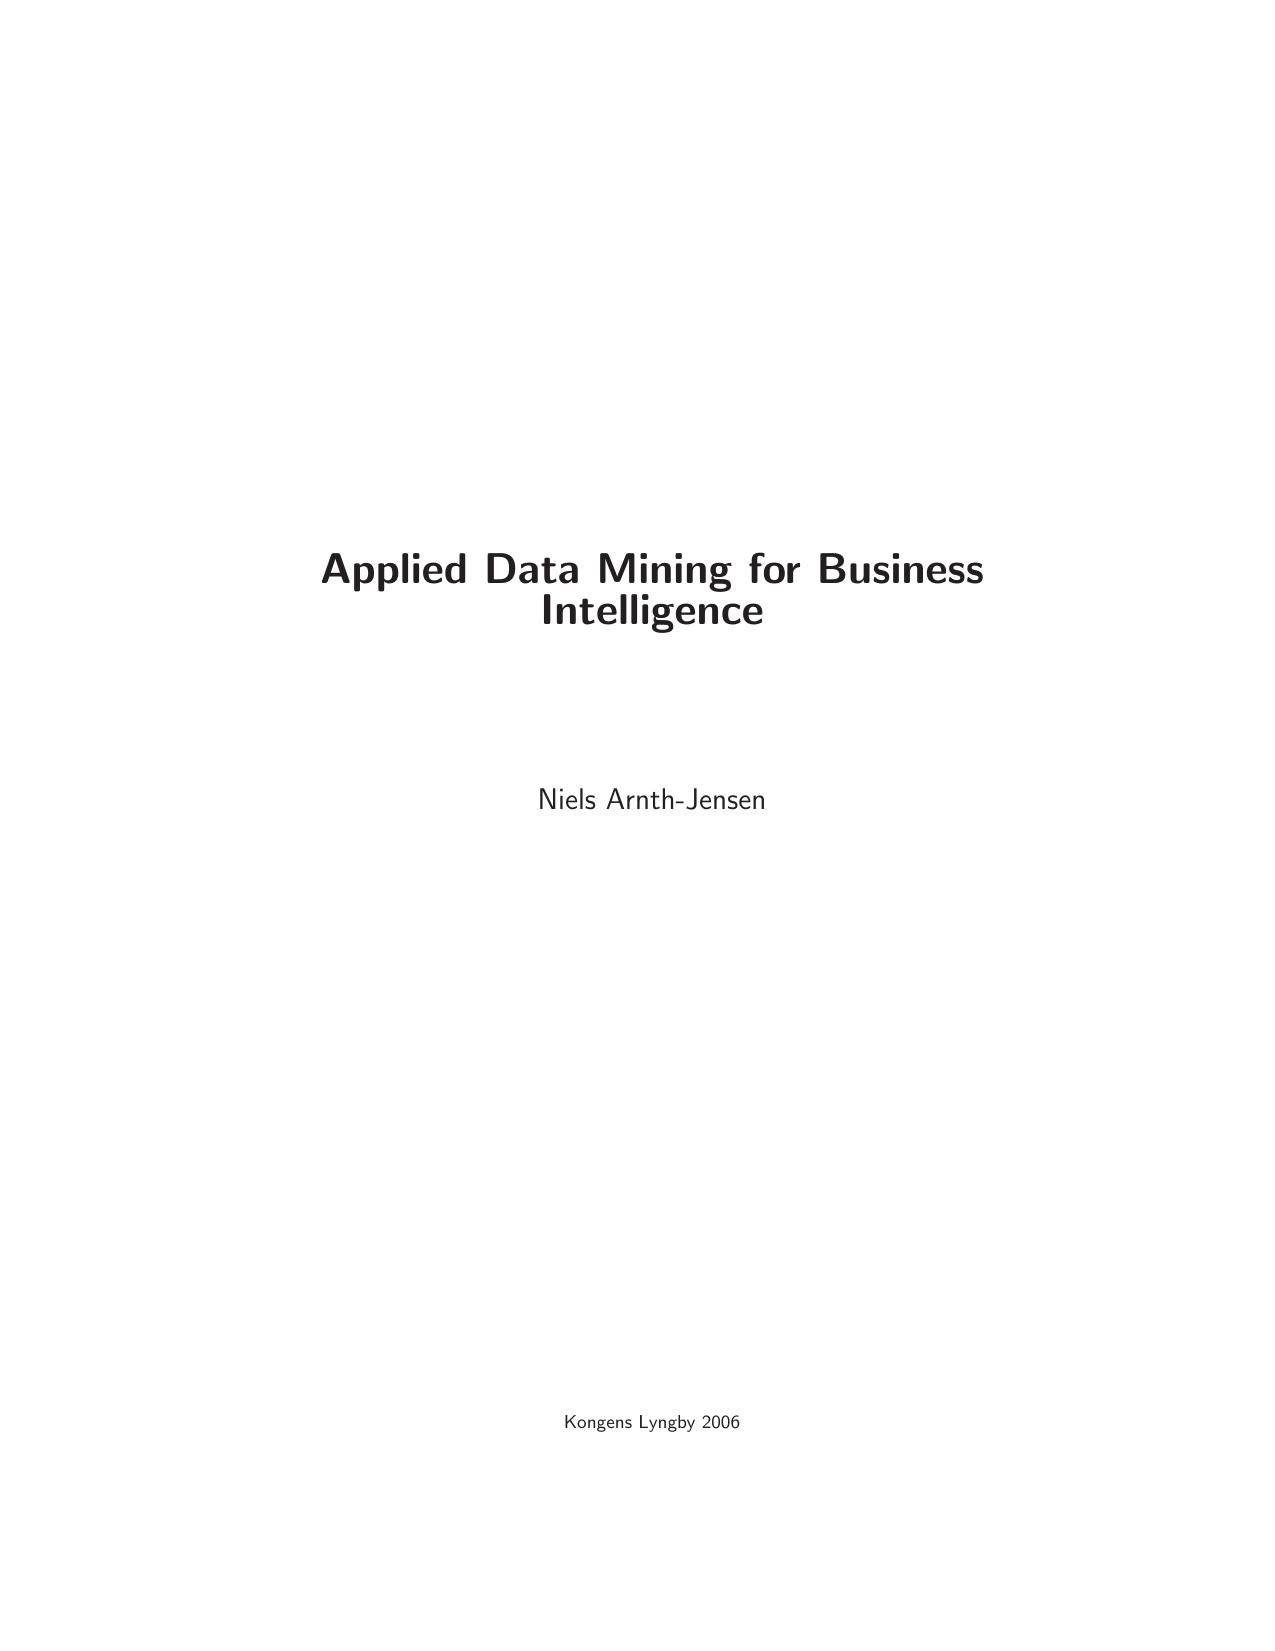 Applied Data Mining for Business Intelligence